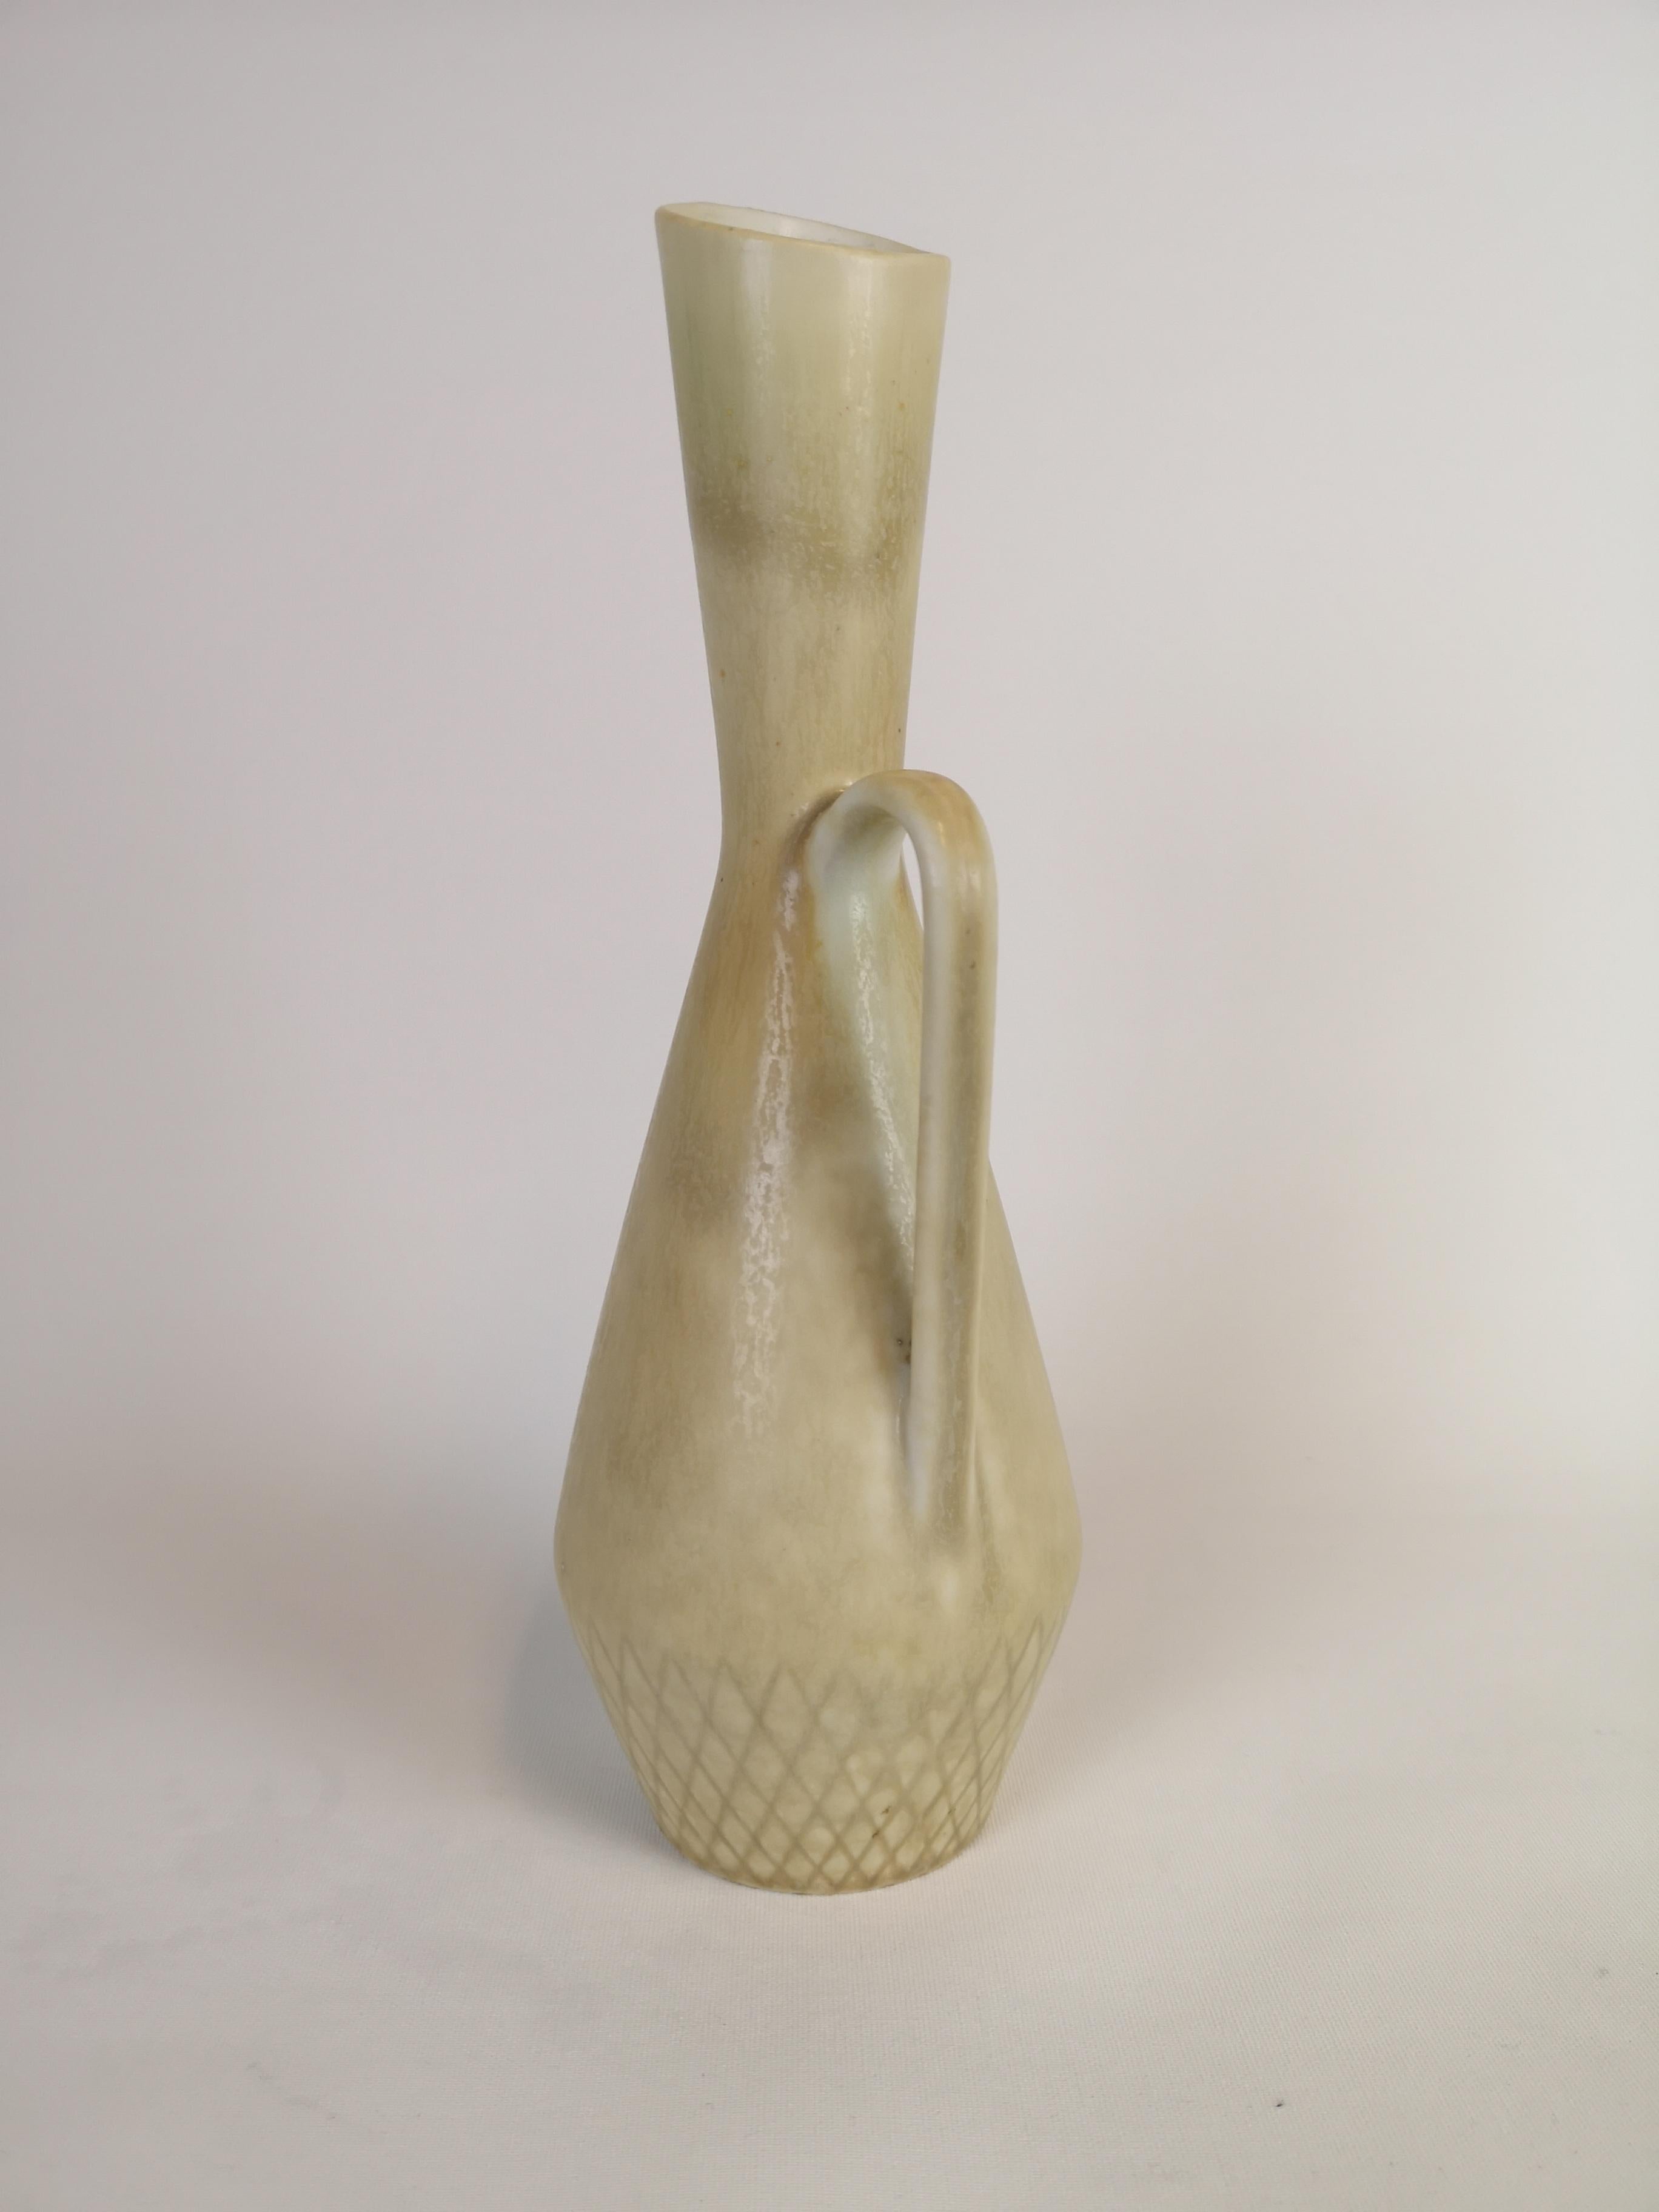 Nicely sculptured vase with glaze that shifts in colors. 
Made in Sweden at Rörstrand factory and designed by C-H Stålhane. 

Very nice condition. 

Measure: H 27 cm, D 10 cm.
 